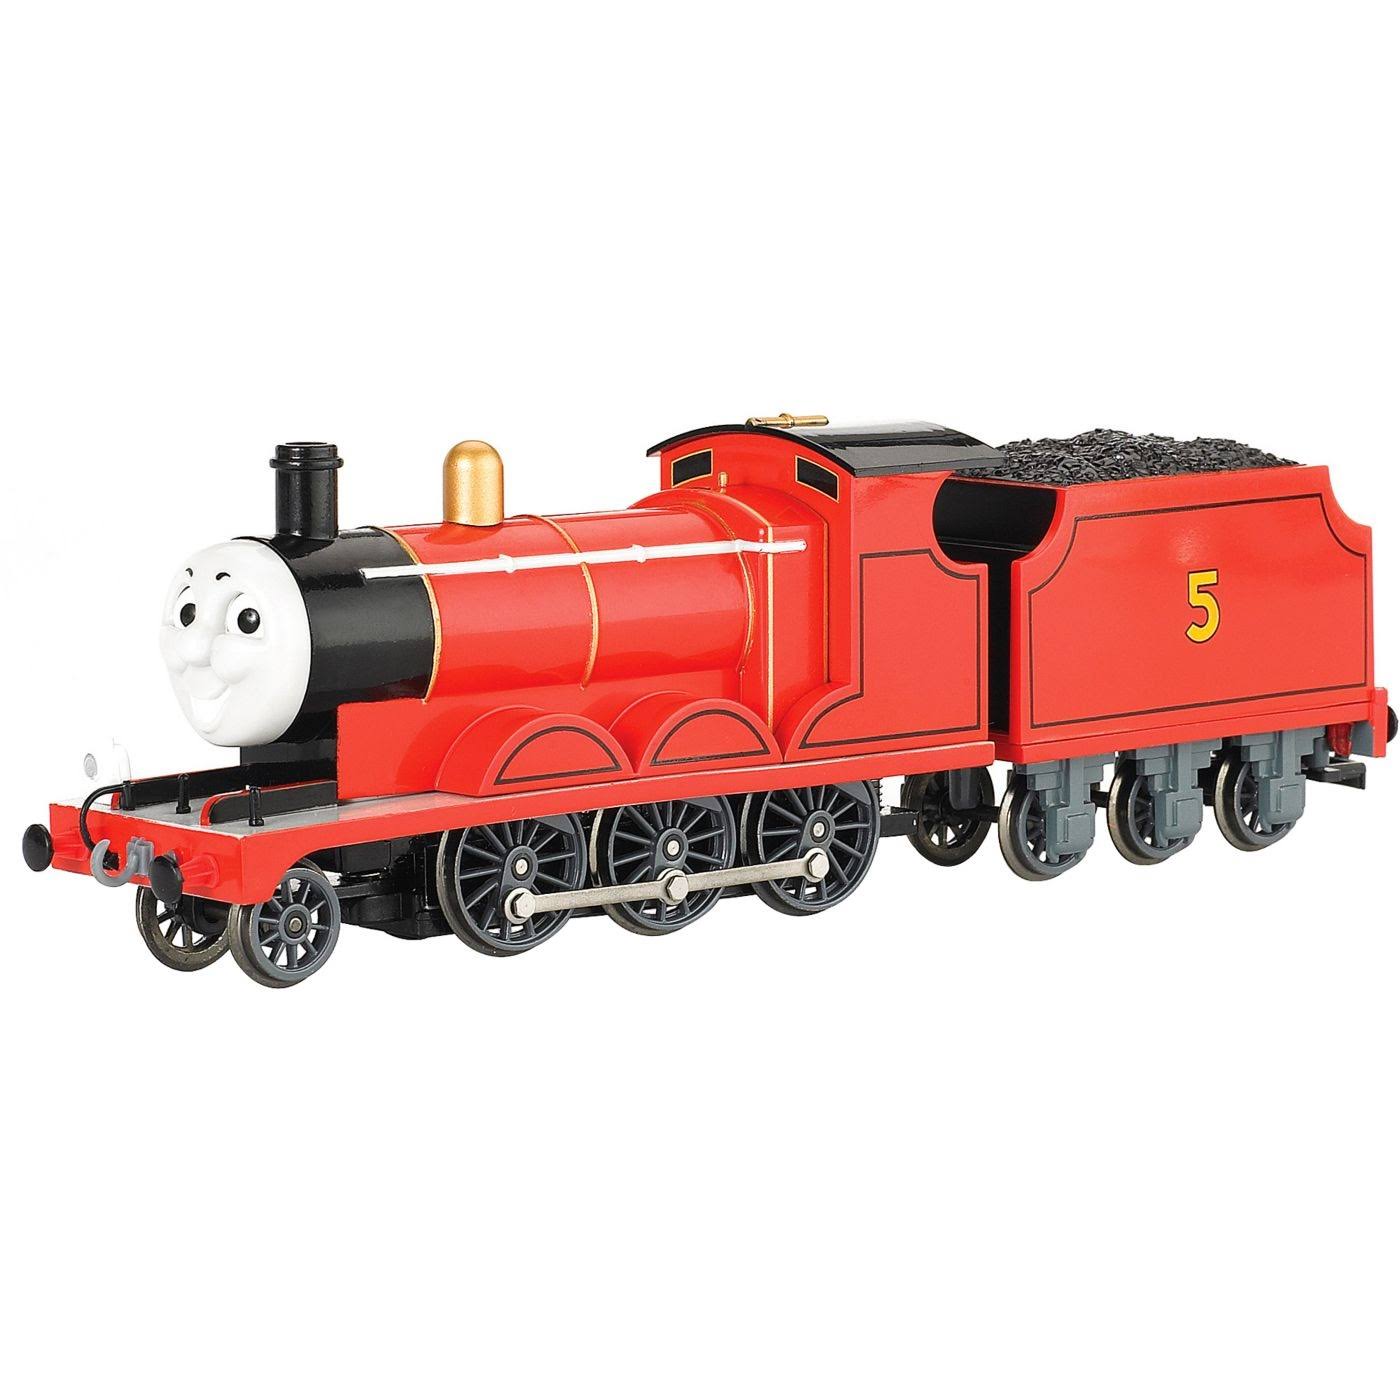 Bachmann Trains 58743 Thomas & Friends James The Red Engine w/Moving Eyes - Ho Scale